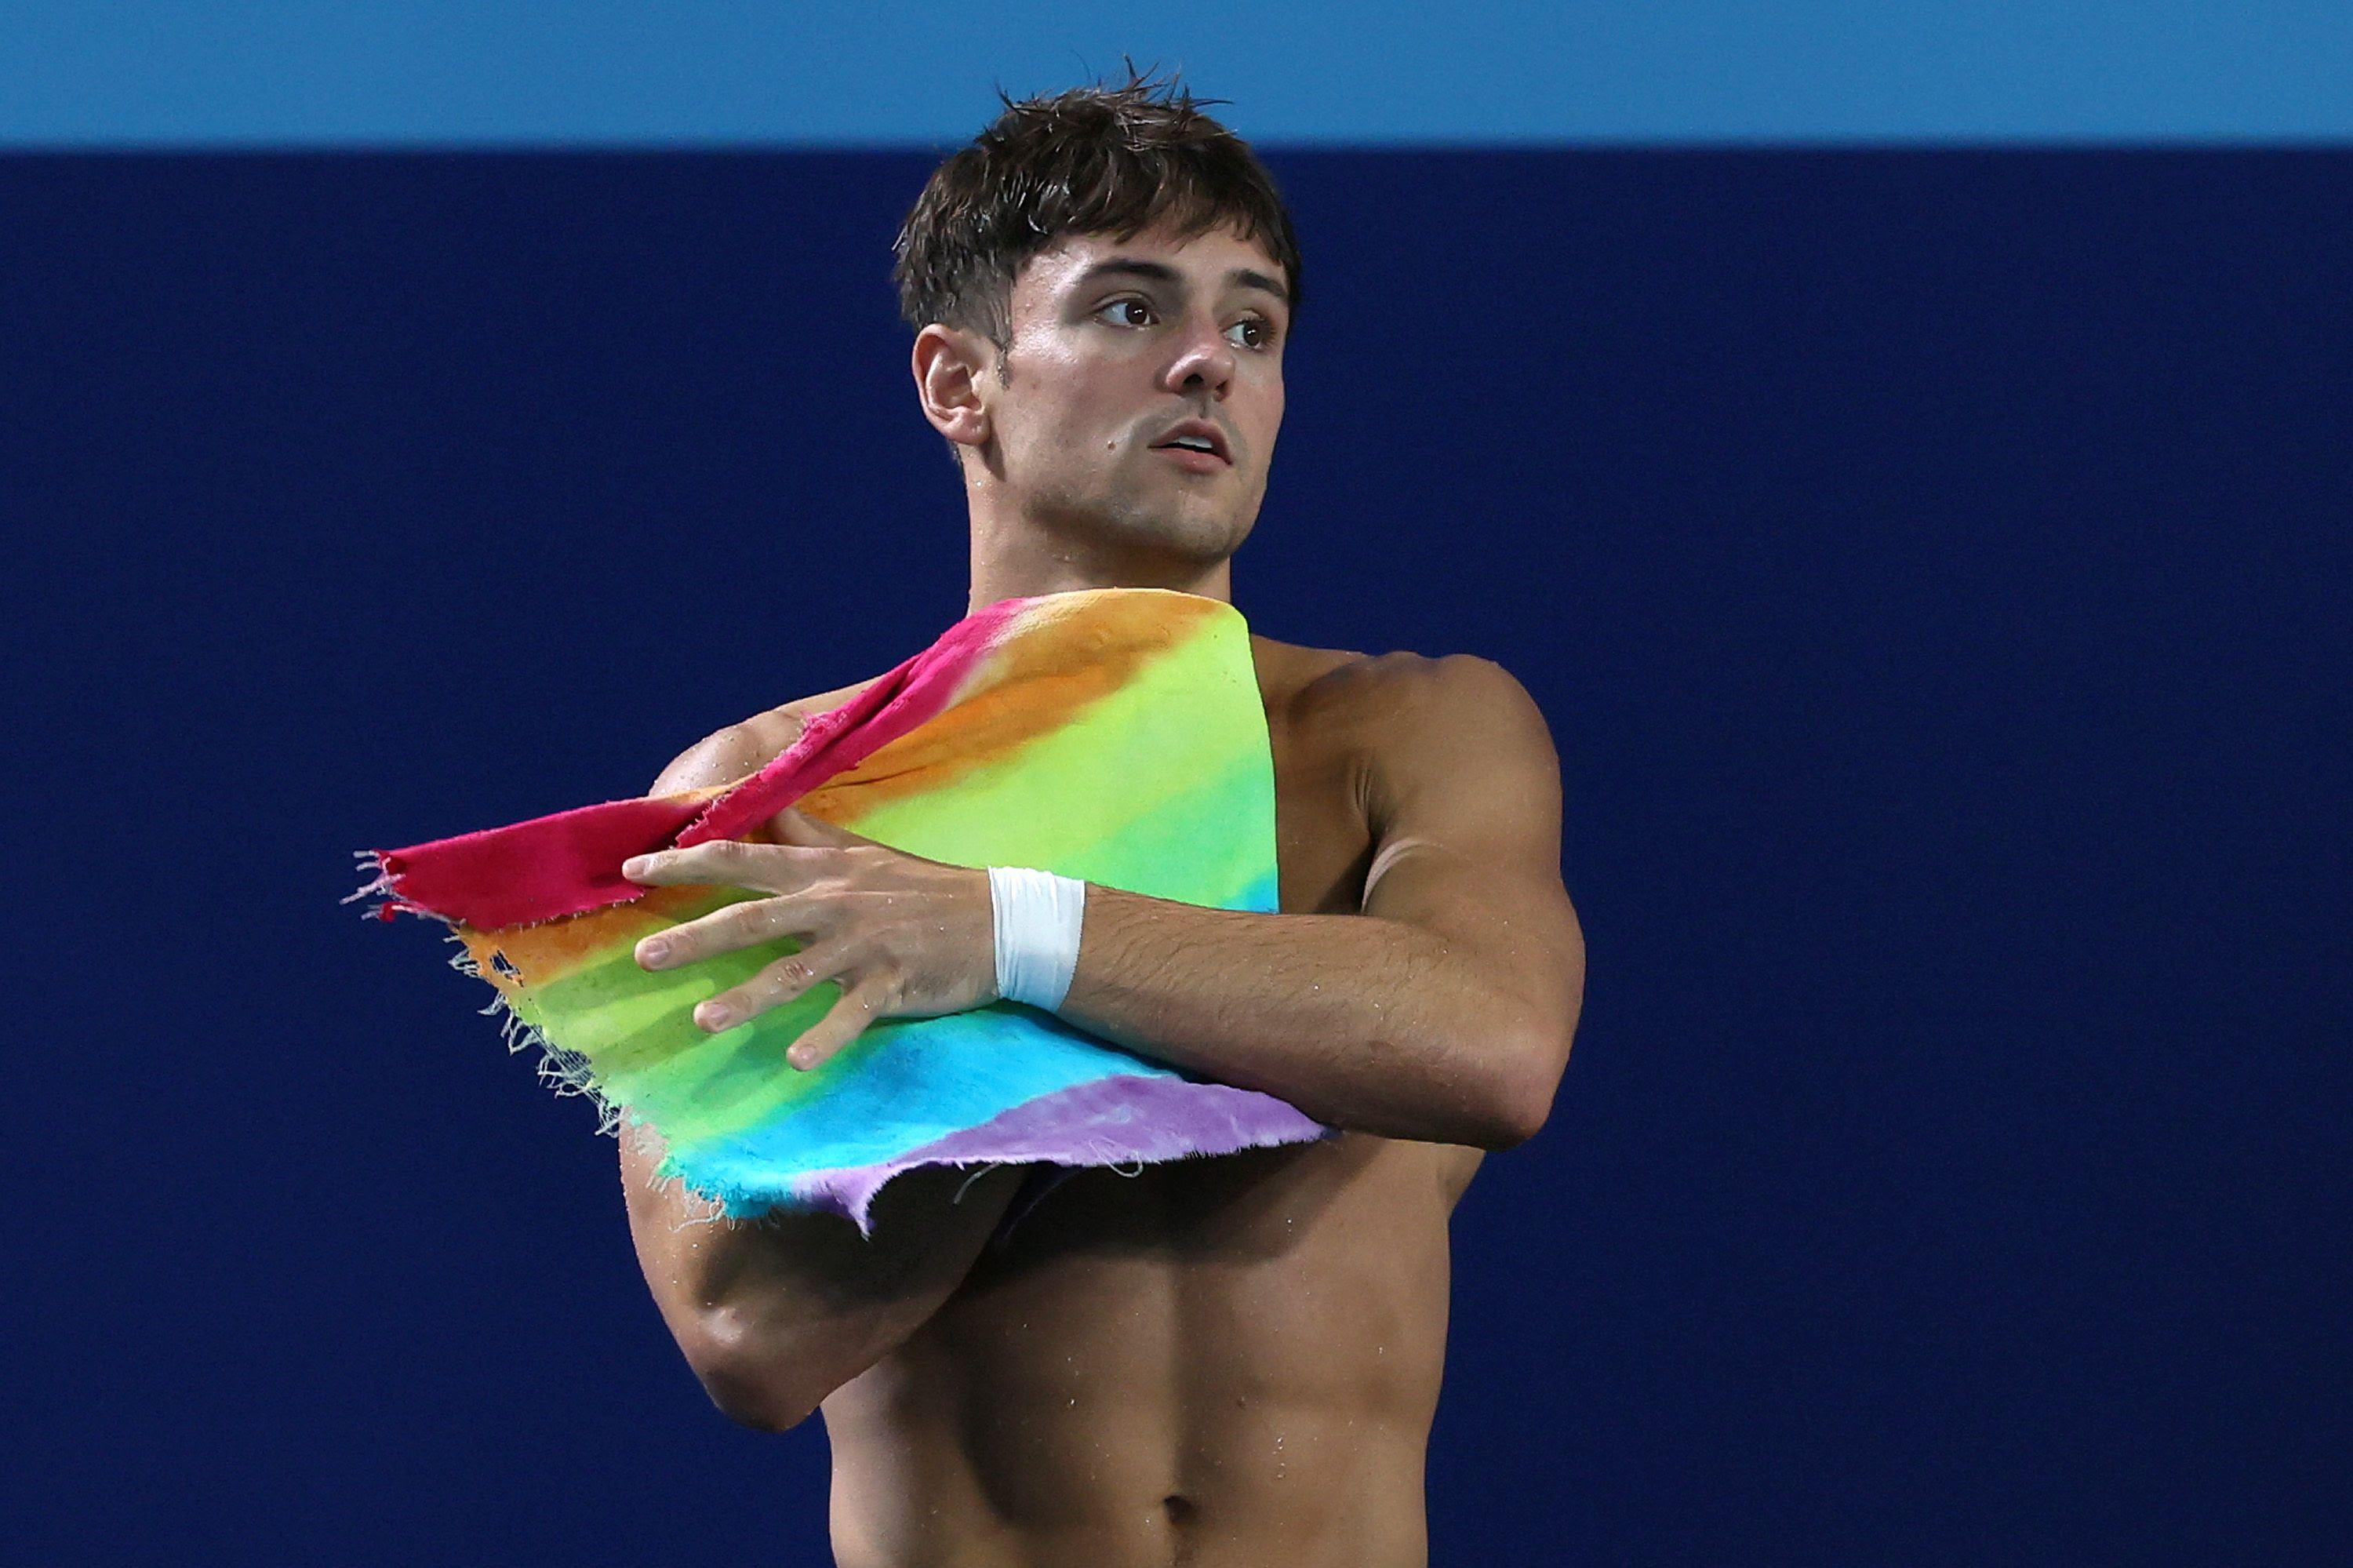 Daley mind games before diving event?